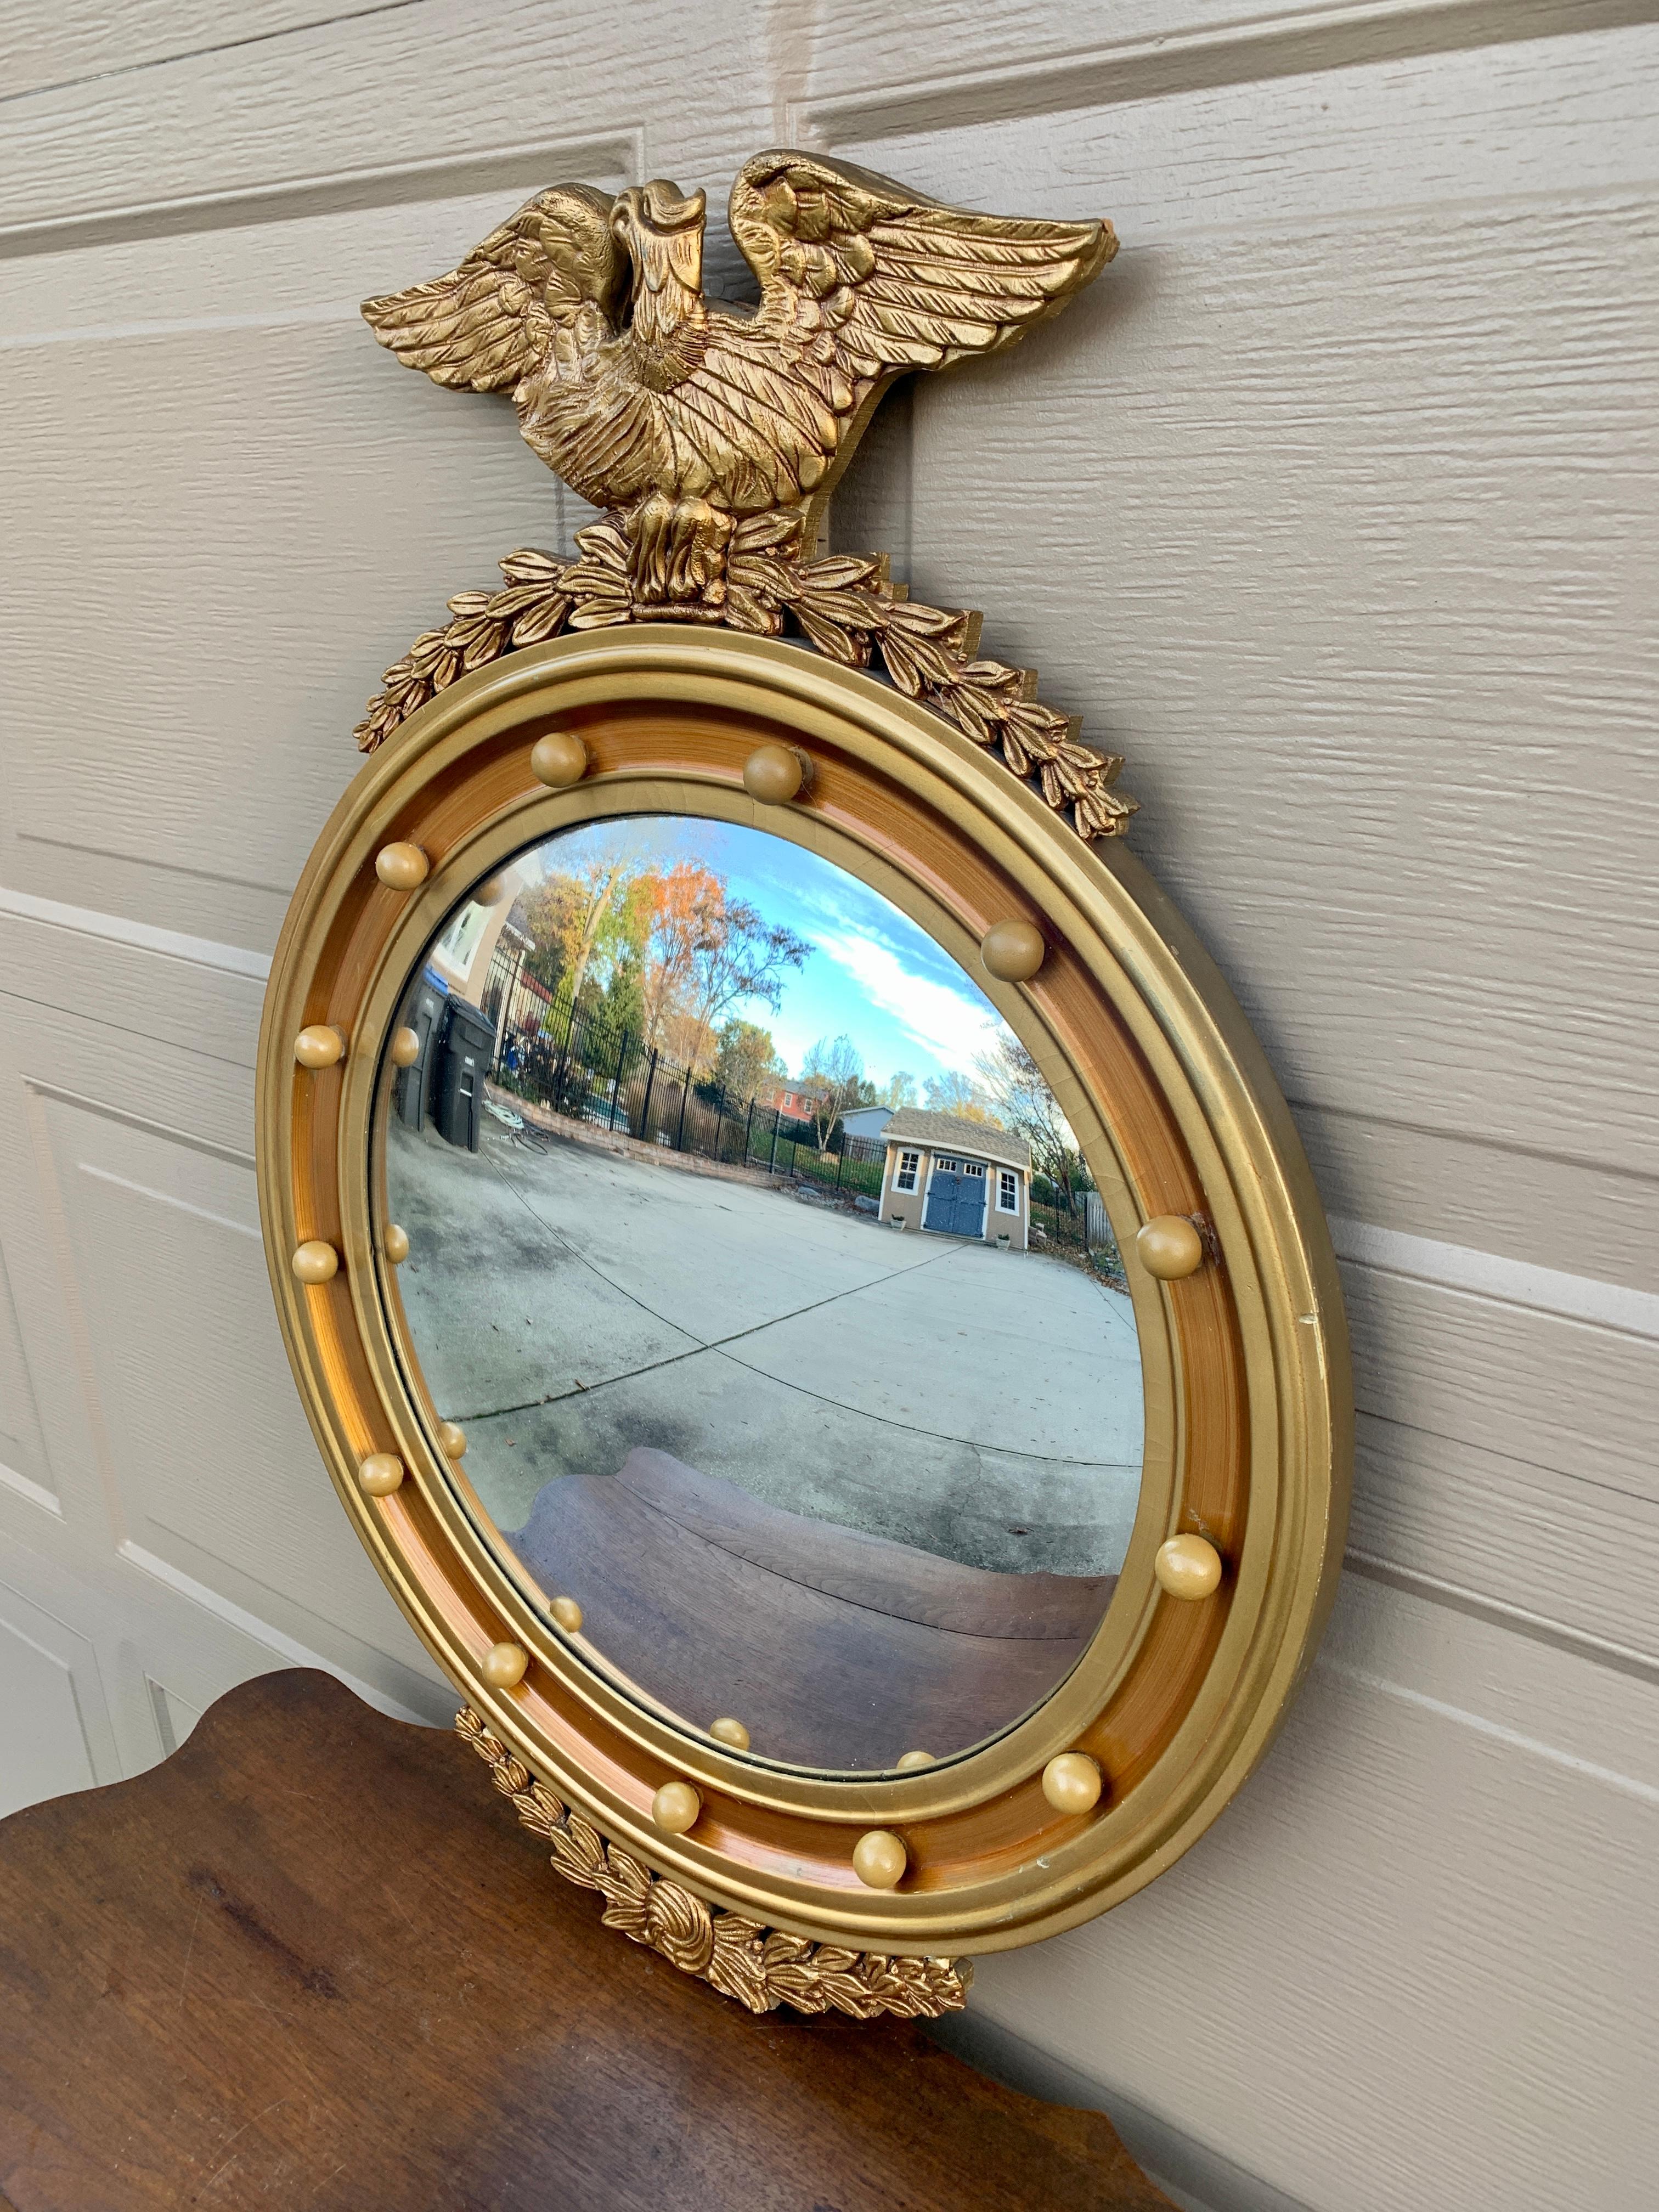 A gorgeous Federal or Regency style convex bullseye wall mirror featuring a carved eagle with open wings standing on olive branches and 13 small spheres representing the original 13 colonies around the inside perimeter.

USA, Late 19th